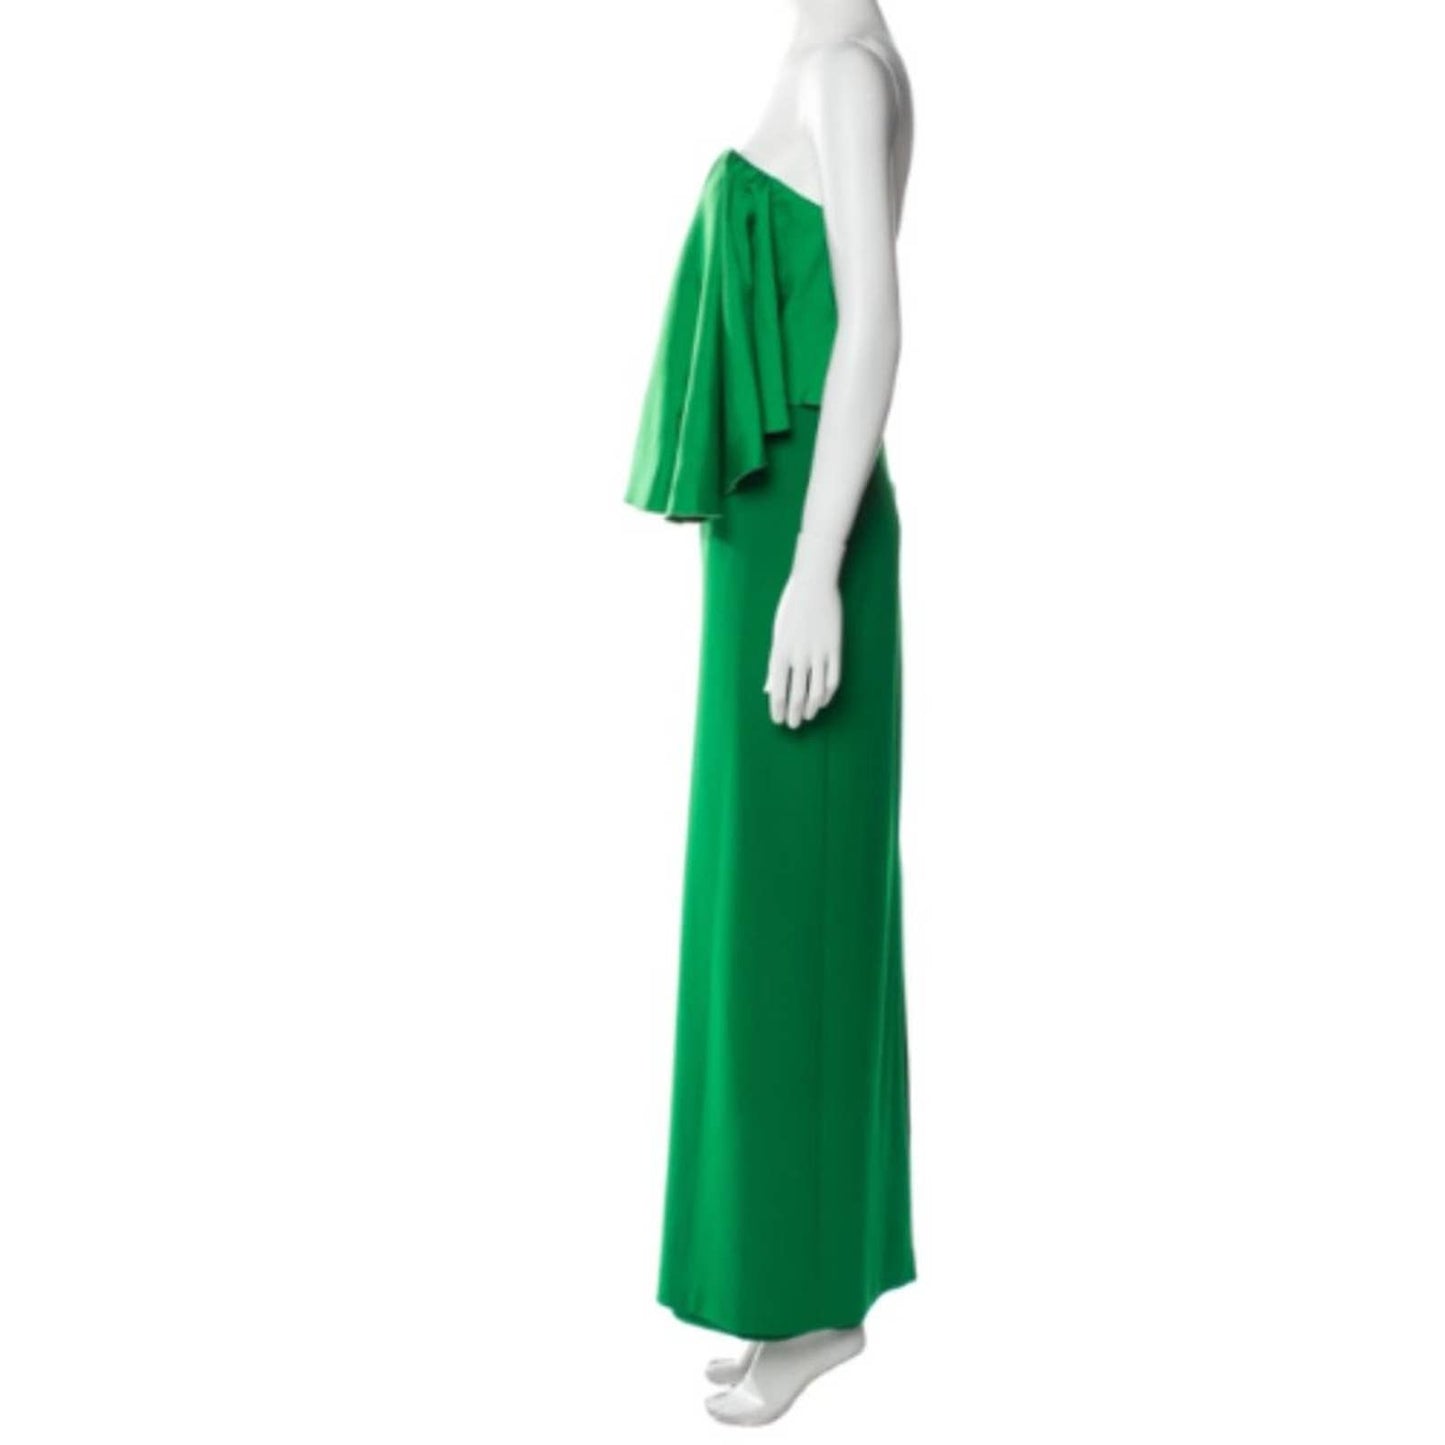 Solace London Green Liv Ruffle Gown Size 10